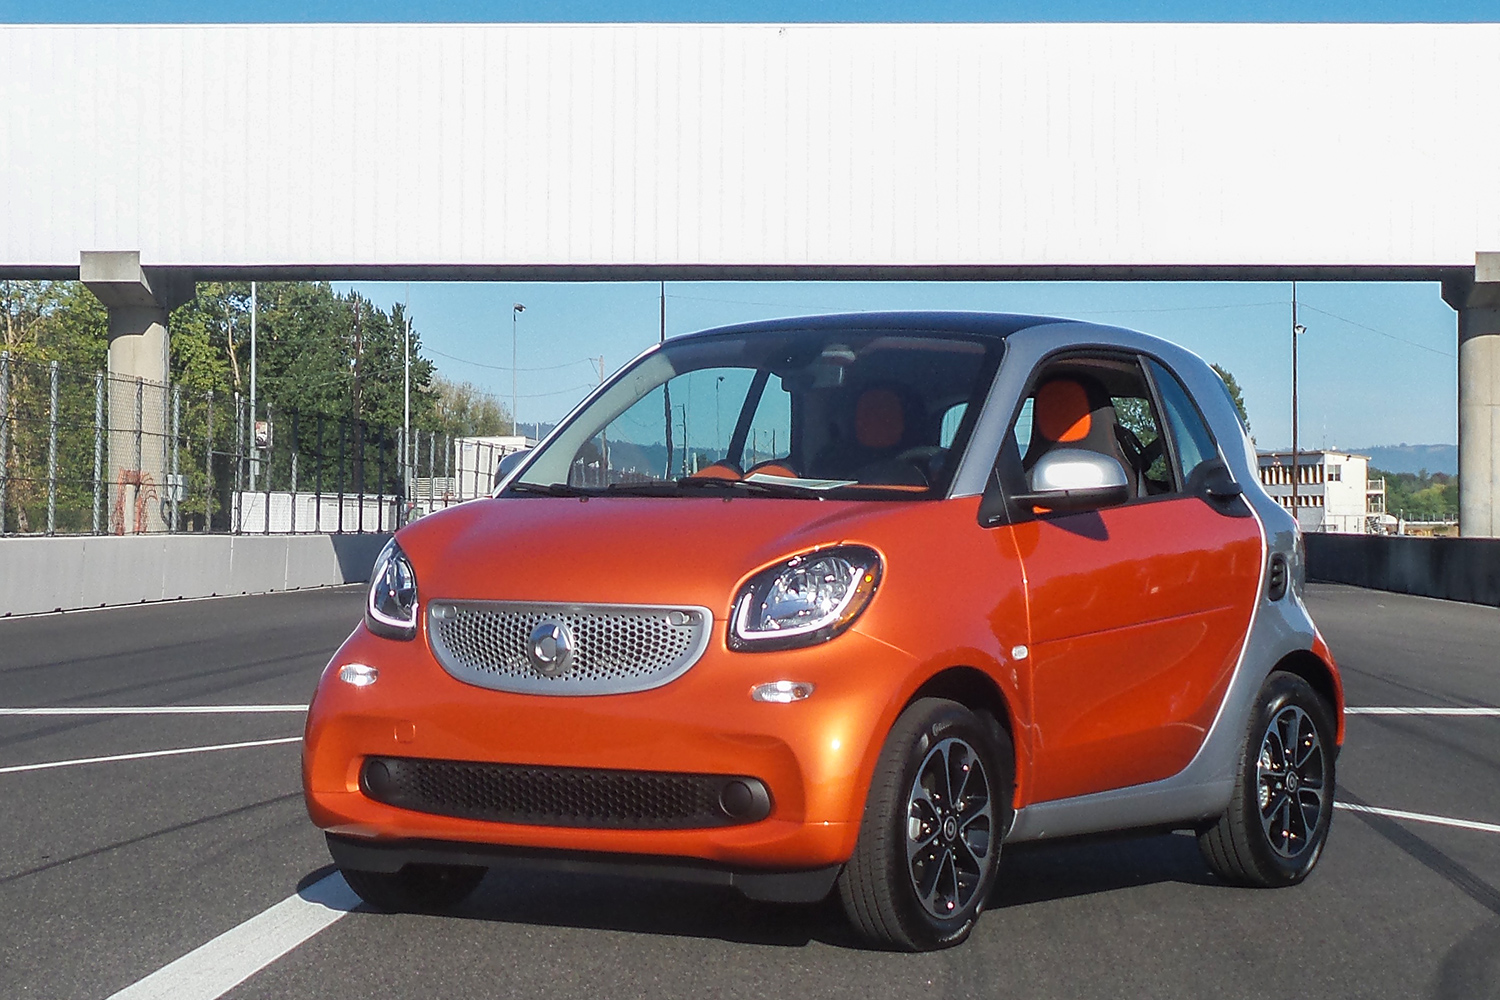 2016 Smart ForTwo review: Smart ForTwo grows up for 2016, stays as compact  as ever - CNET